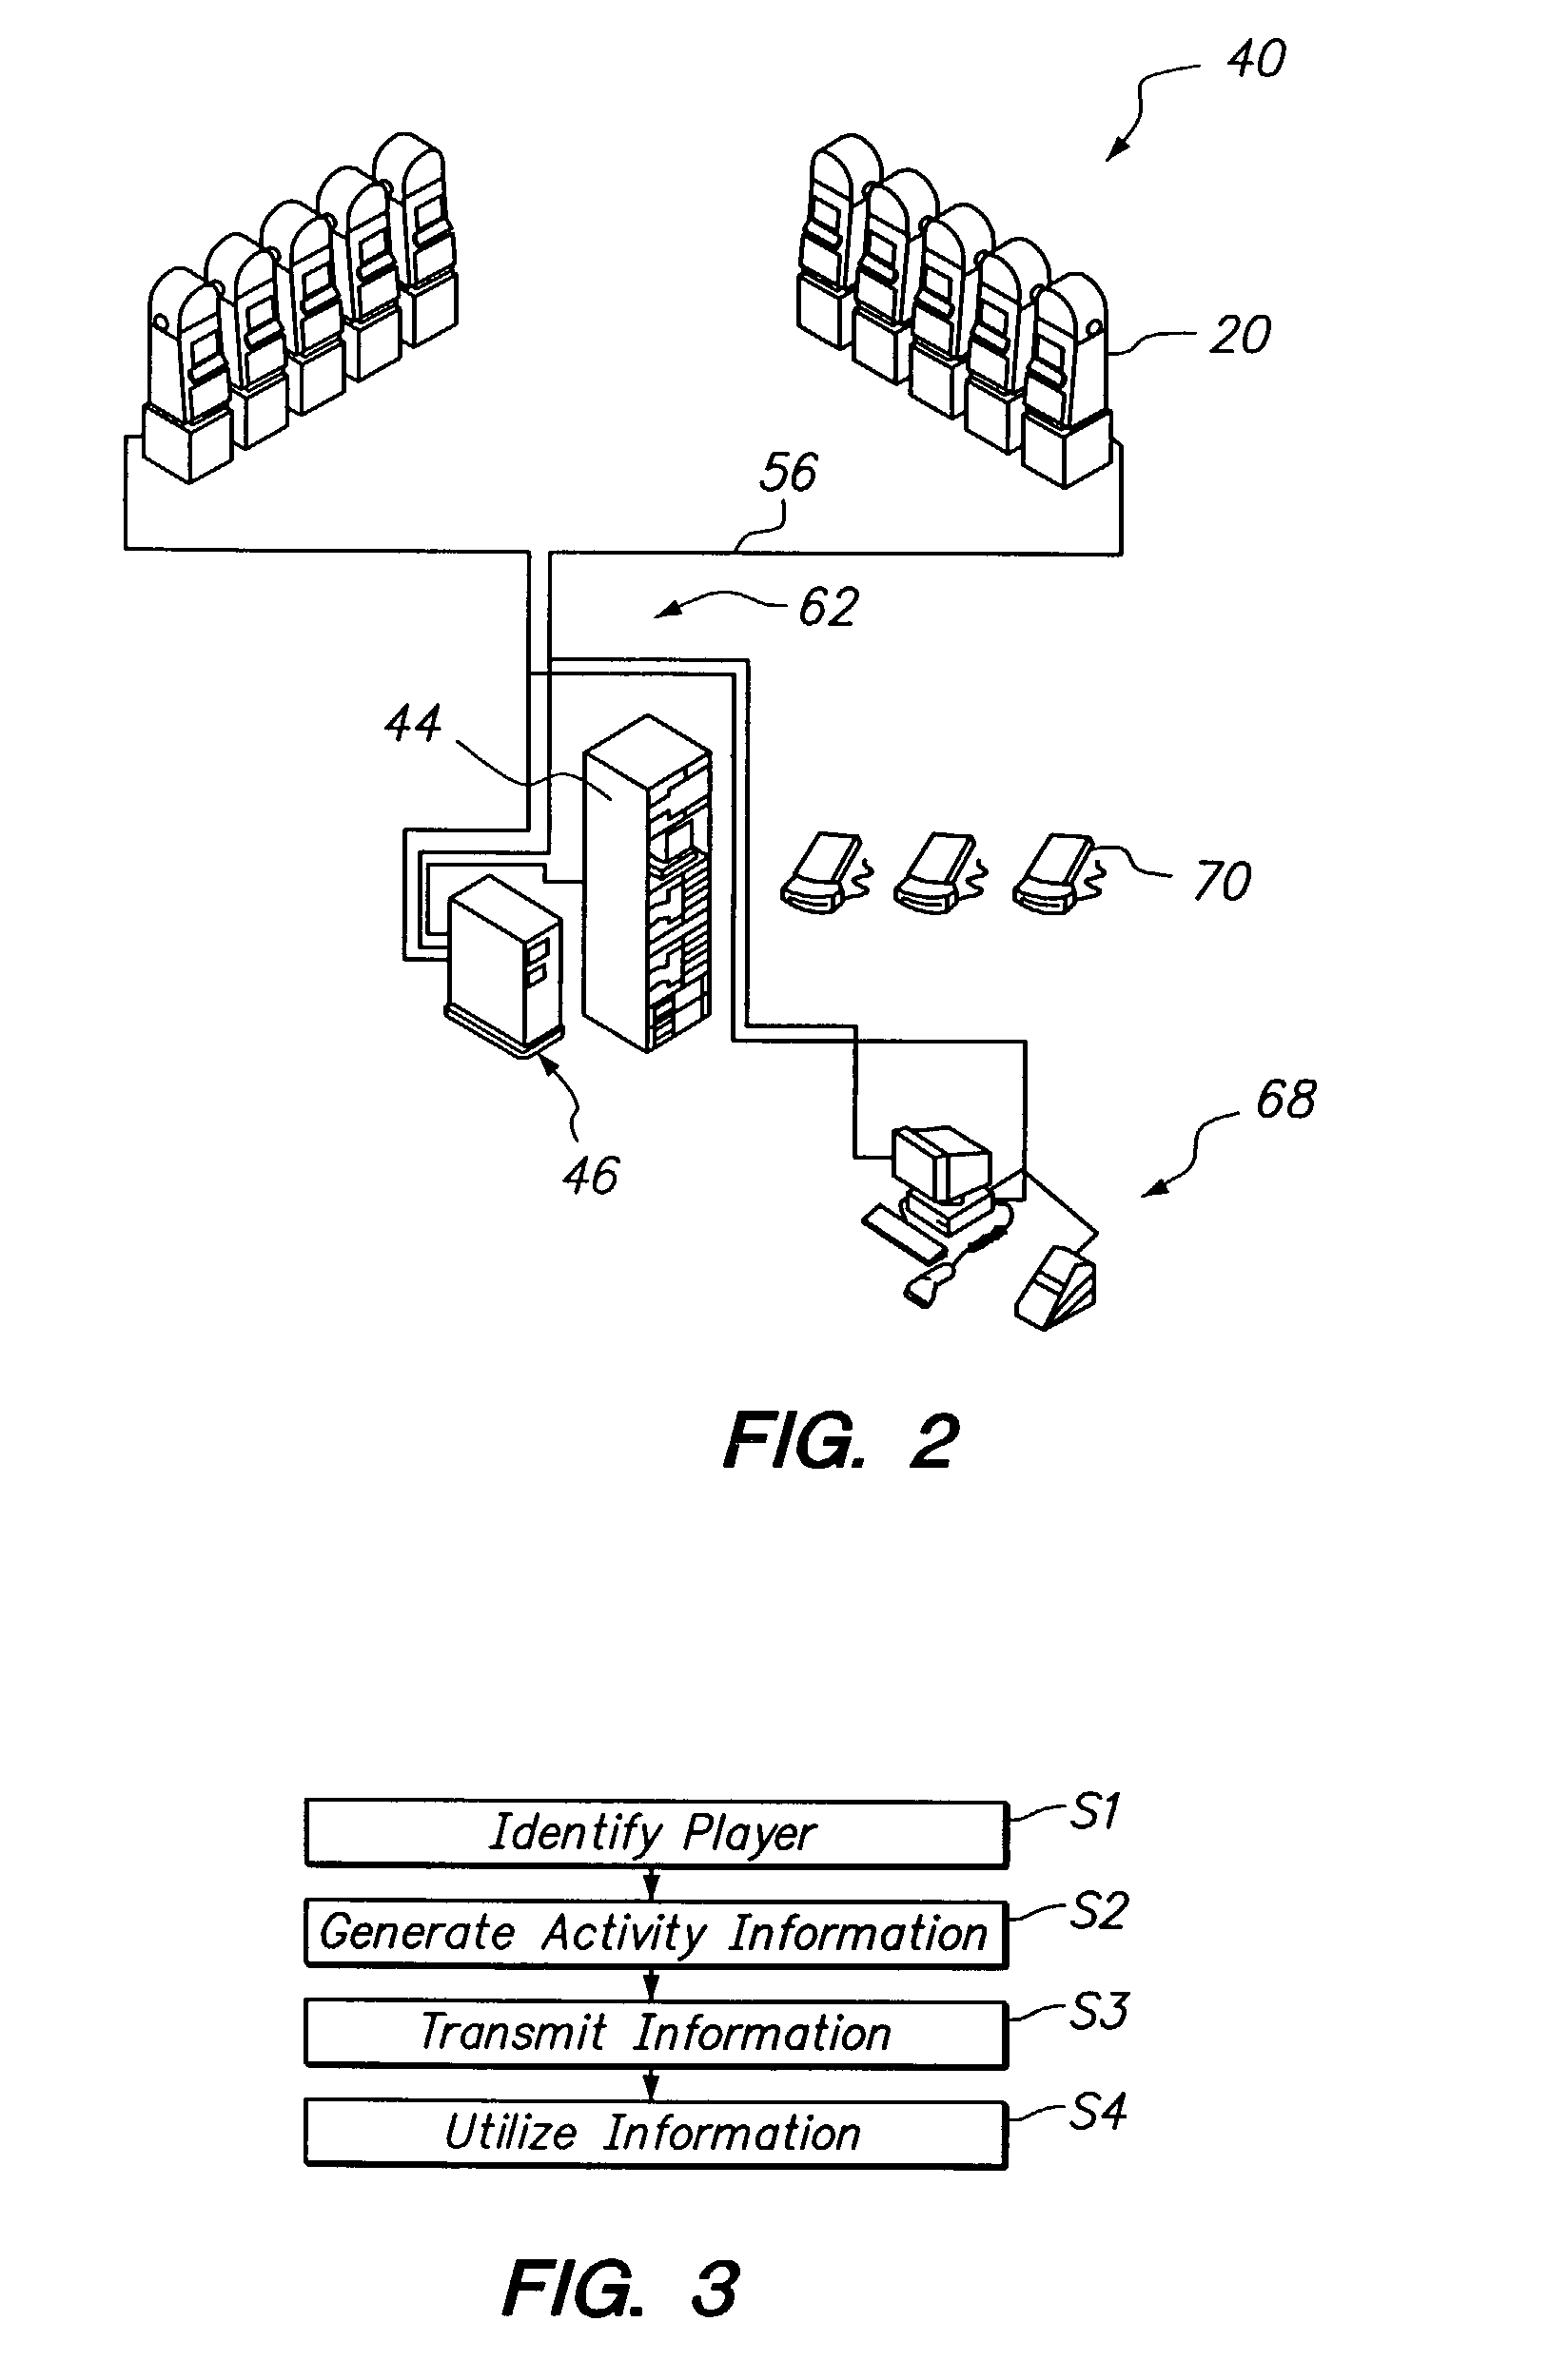 Method and apparatus for tracking game play